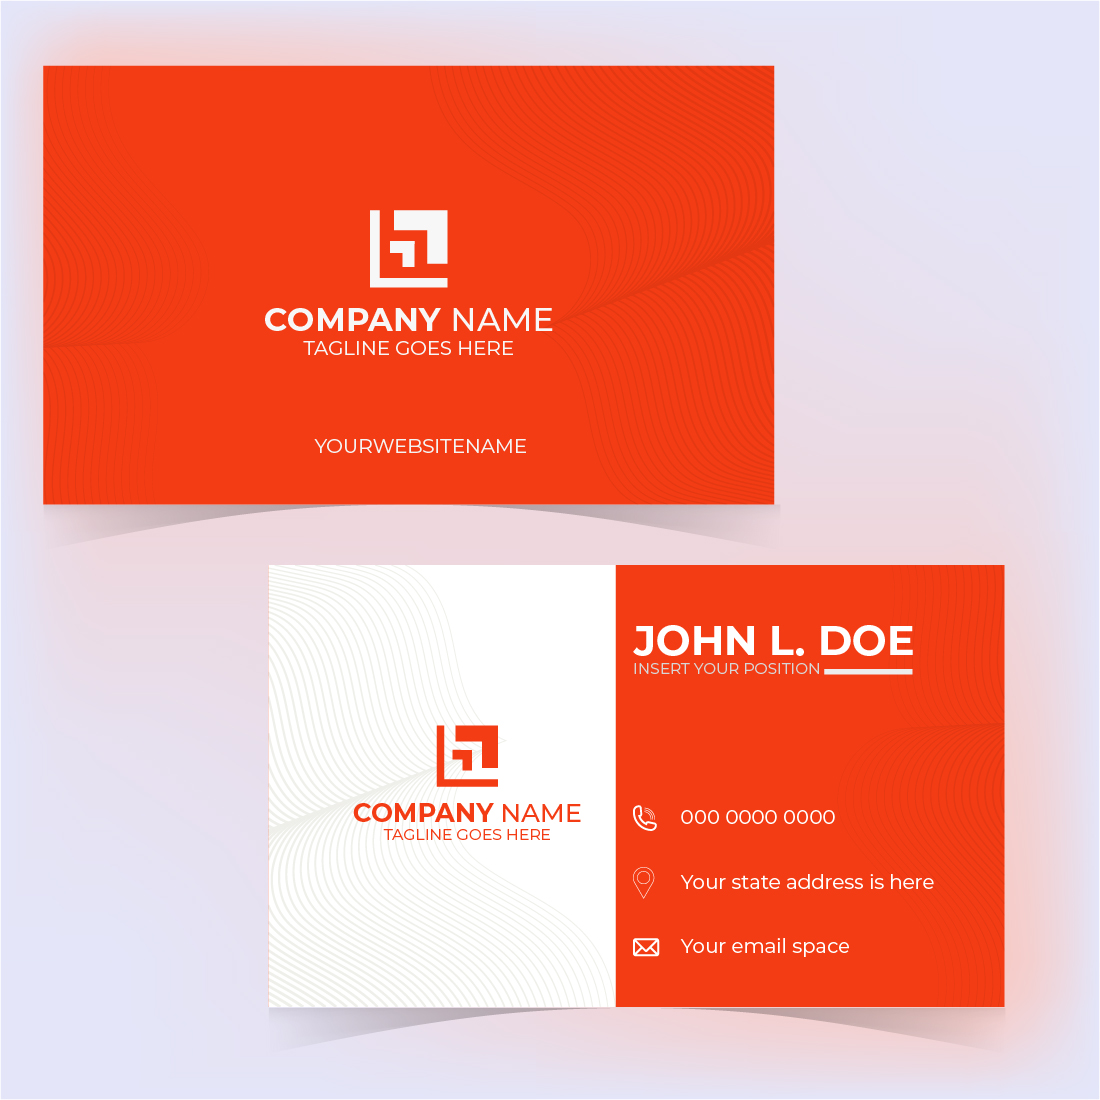 HR business card cover image.